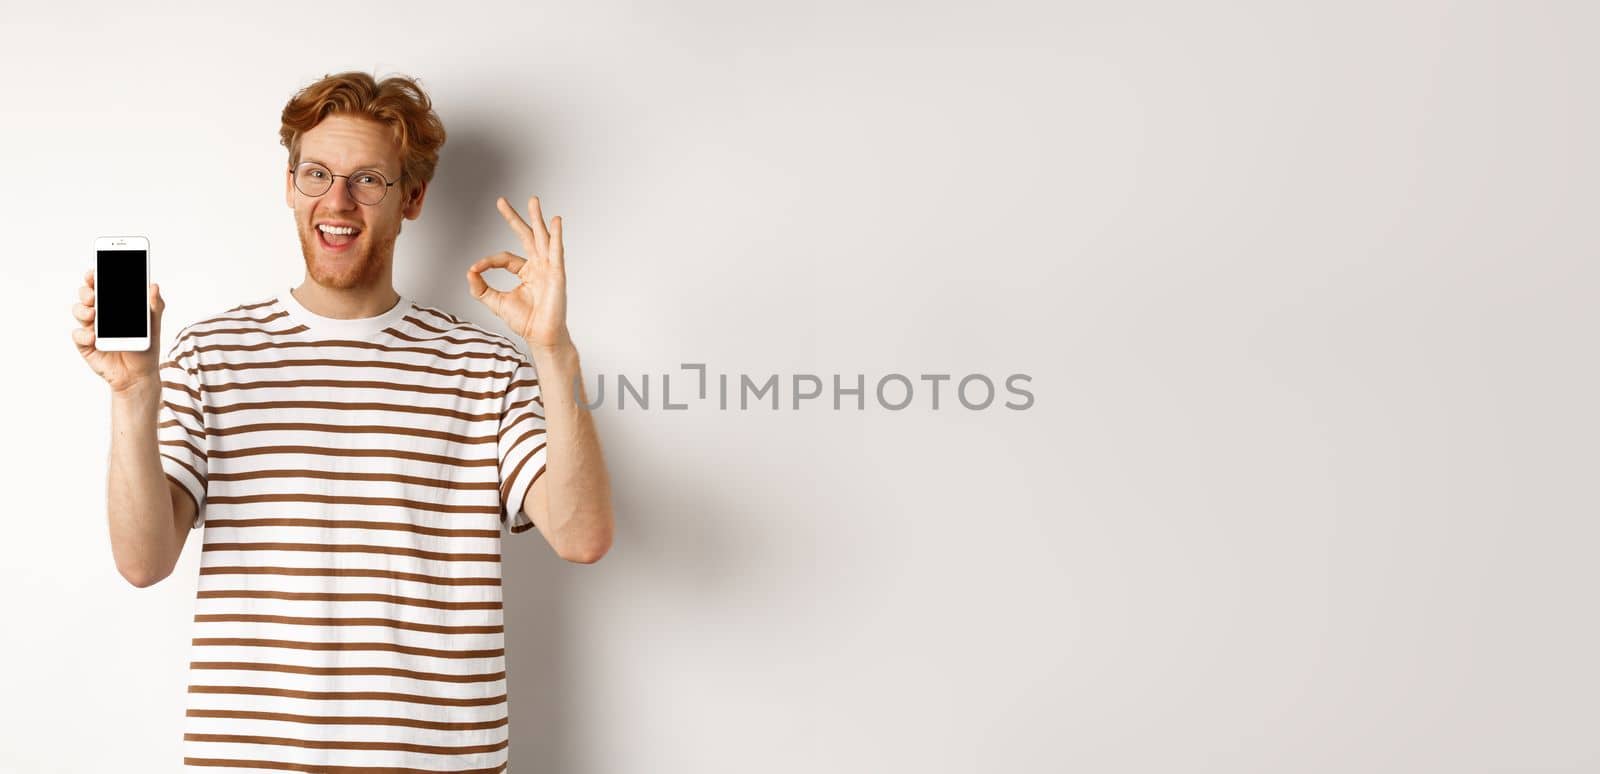 Technology and e-commerce concept. Young man with red hair showing okay sign and blank smartphone screen, praising awesome app, standing over white background by Benzoix